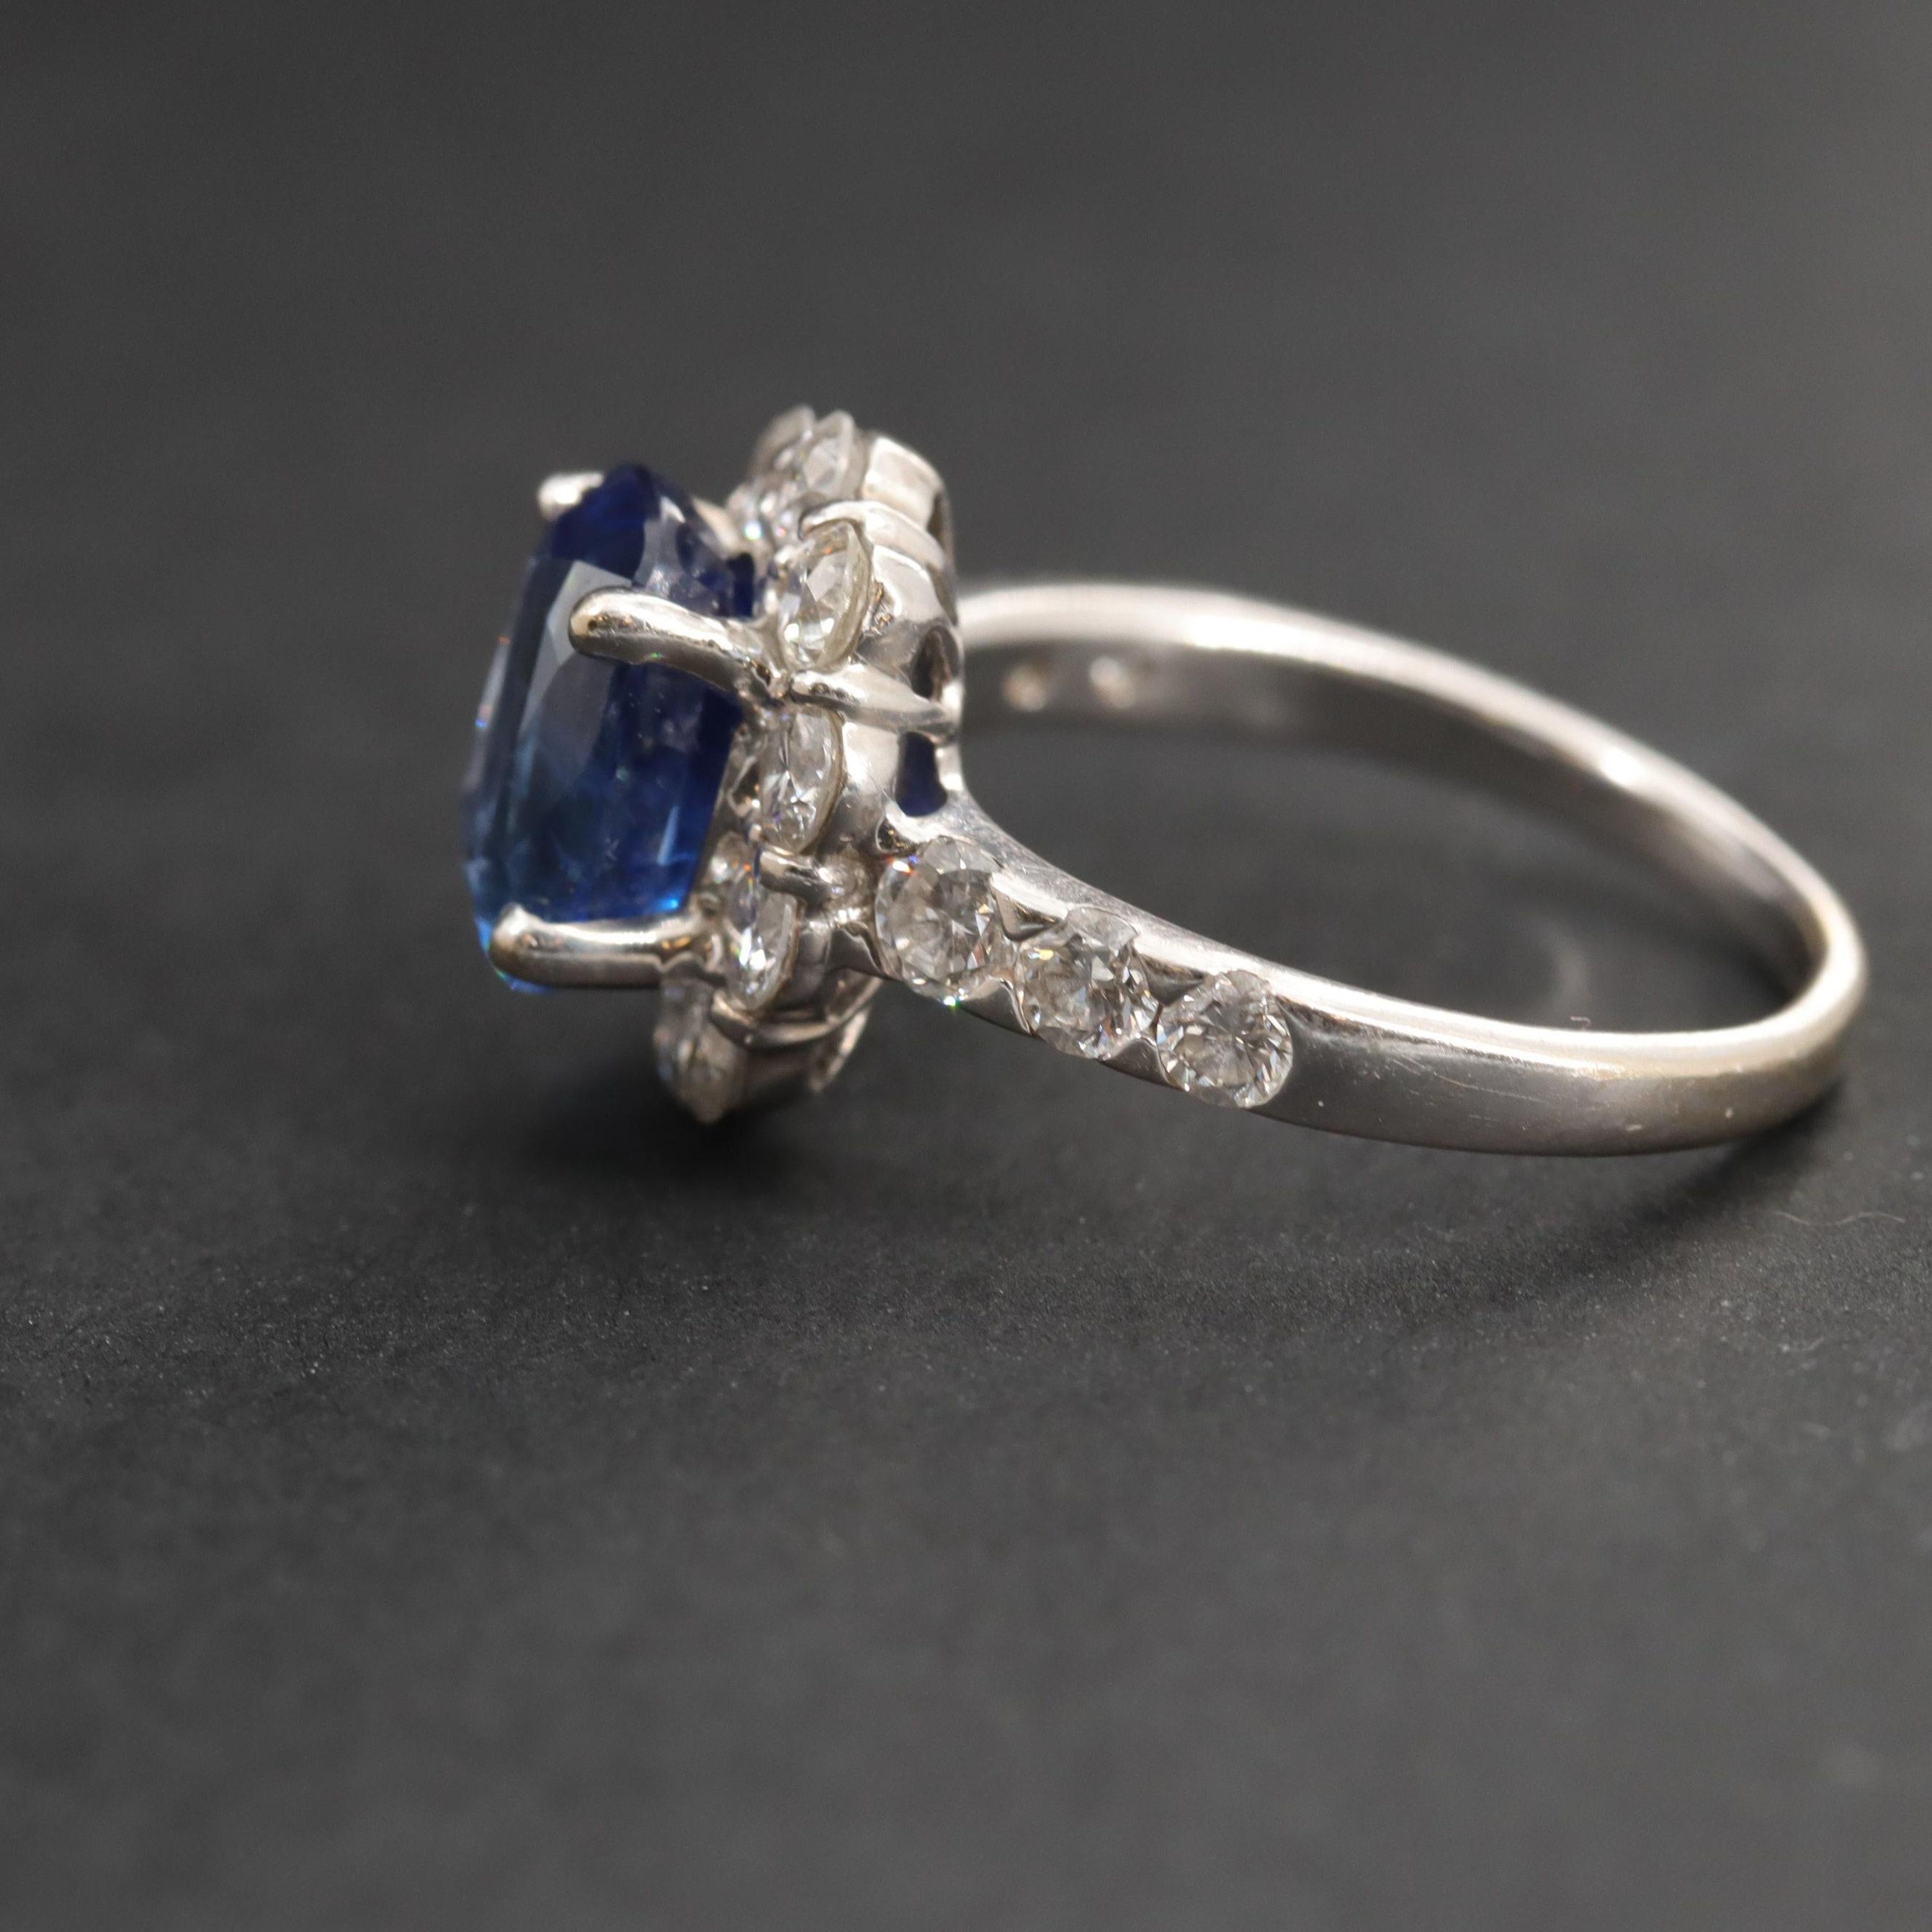 For Sale:  2.9 Carat Sapphire and Diamond Engagement Ring White Gold Sapphire Cocktail Ring 2